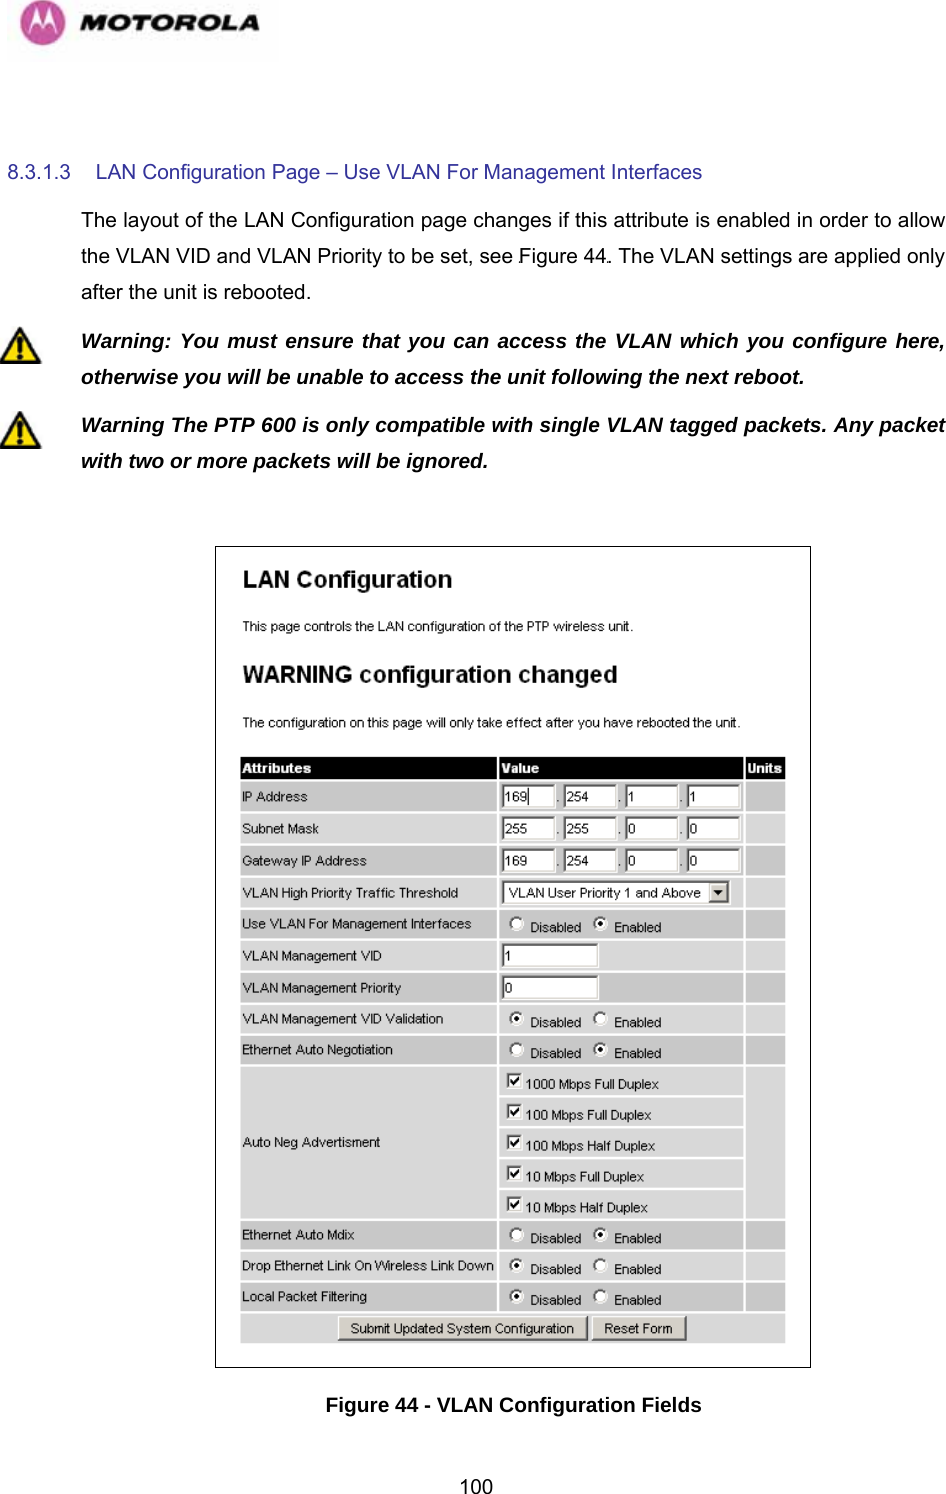   100 8.3.1.3 LAN Configuration Page – Use VLAN For Management Interfaces The layout of the LAN Configuration page changes if this attribute is enabled in order to allow the VLAN VID and VLAN Priority to be set, see 1070HFigure 441071H. The VLAN settings are applied only after the unit is rebooted. Warning: You must ensure that you can access the VLAN which you configure here, otherwise you will be unable to access the unit following the next reboot. Warning The PTP 600 is only compatible with single VLAN tagged packets. Any packet with two or more packets will be ignored.   Figure 44 - VLAN Configuration Fields 